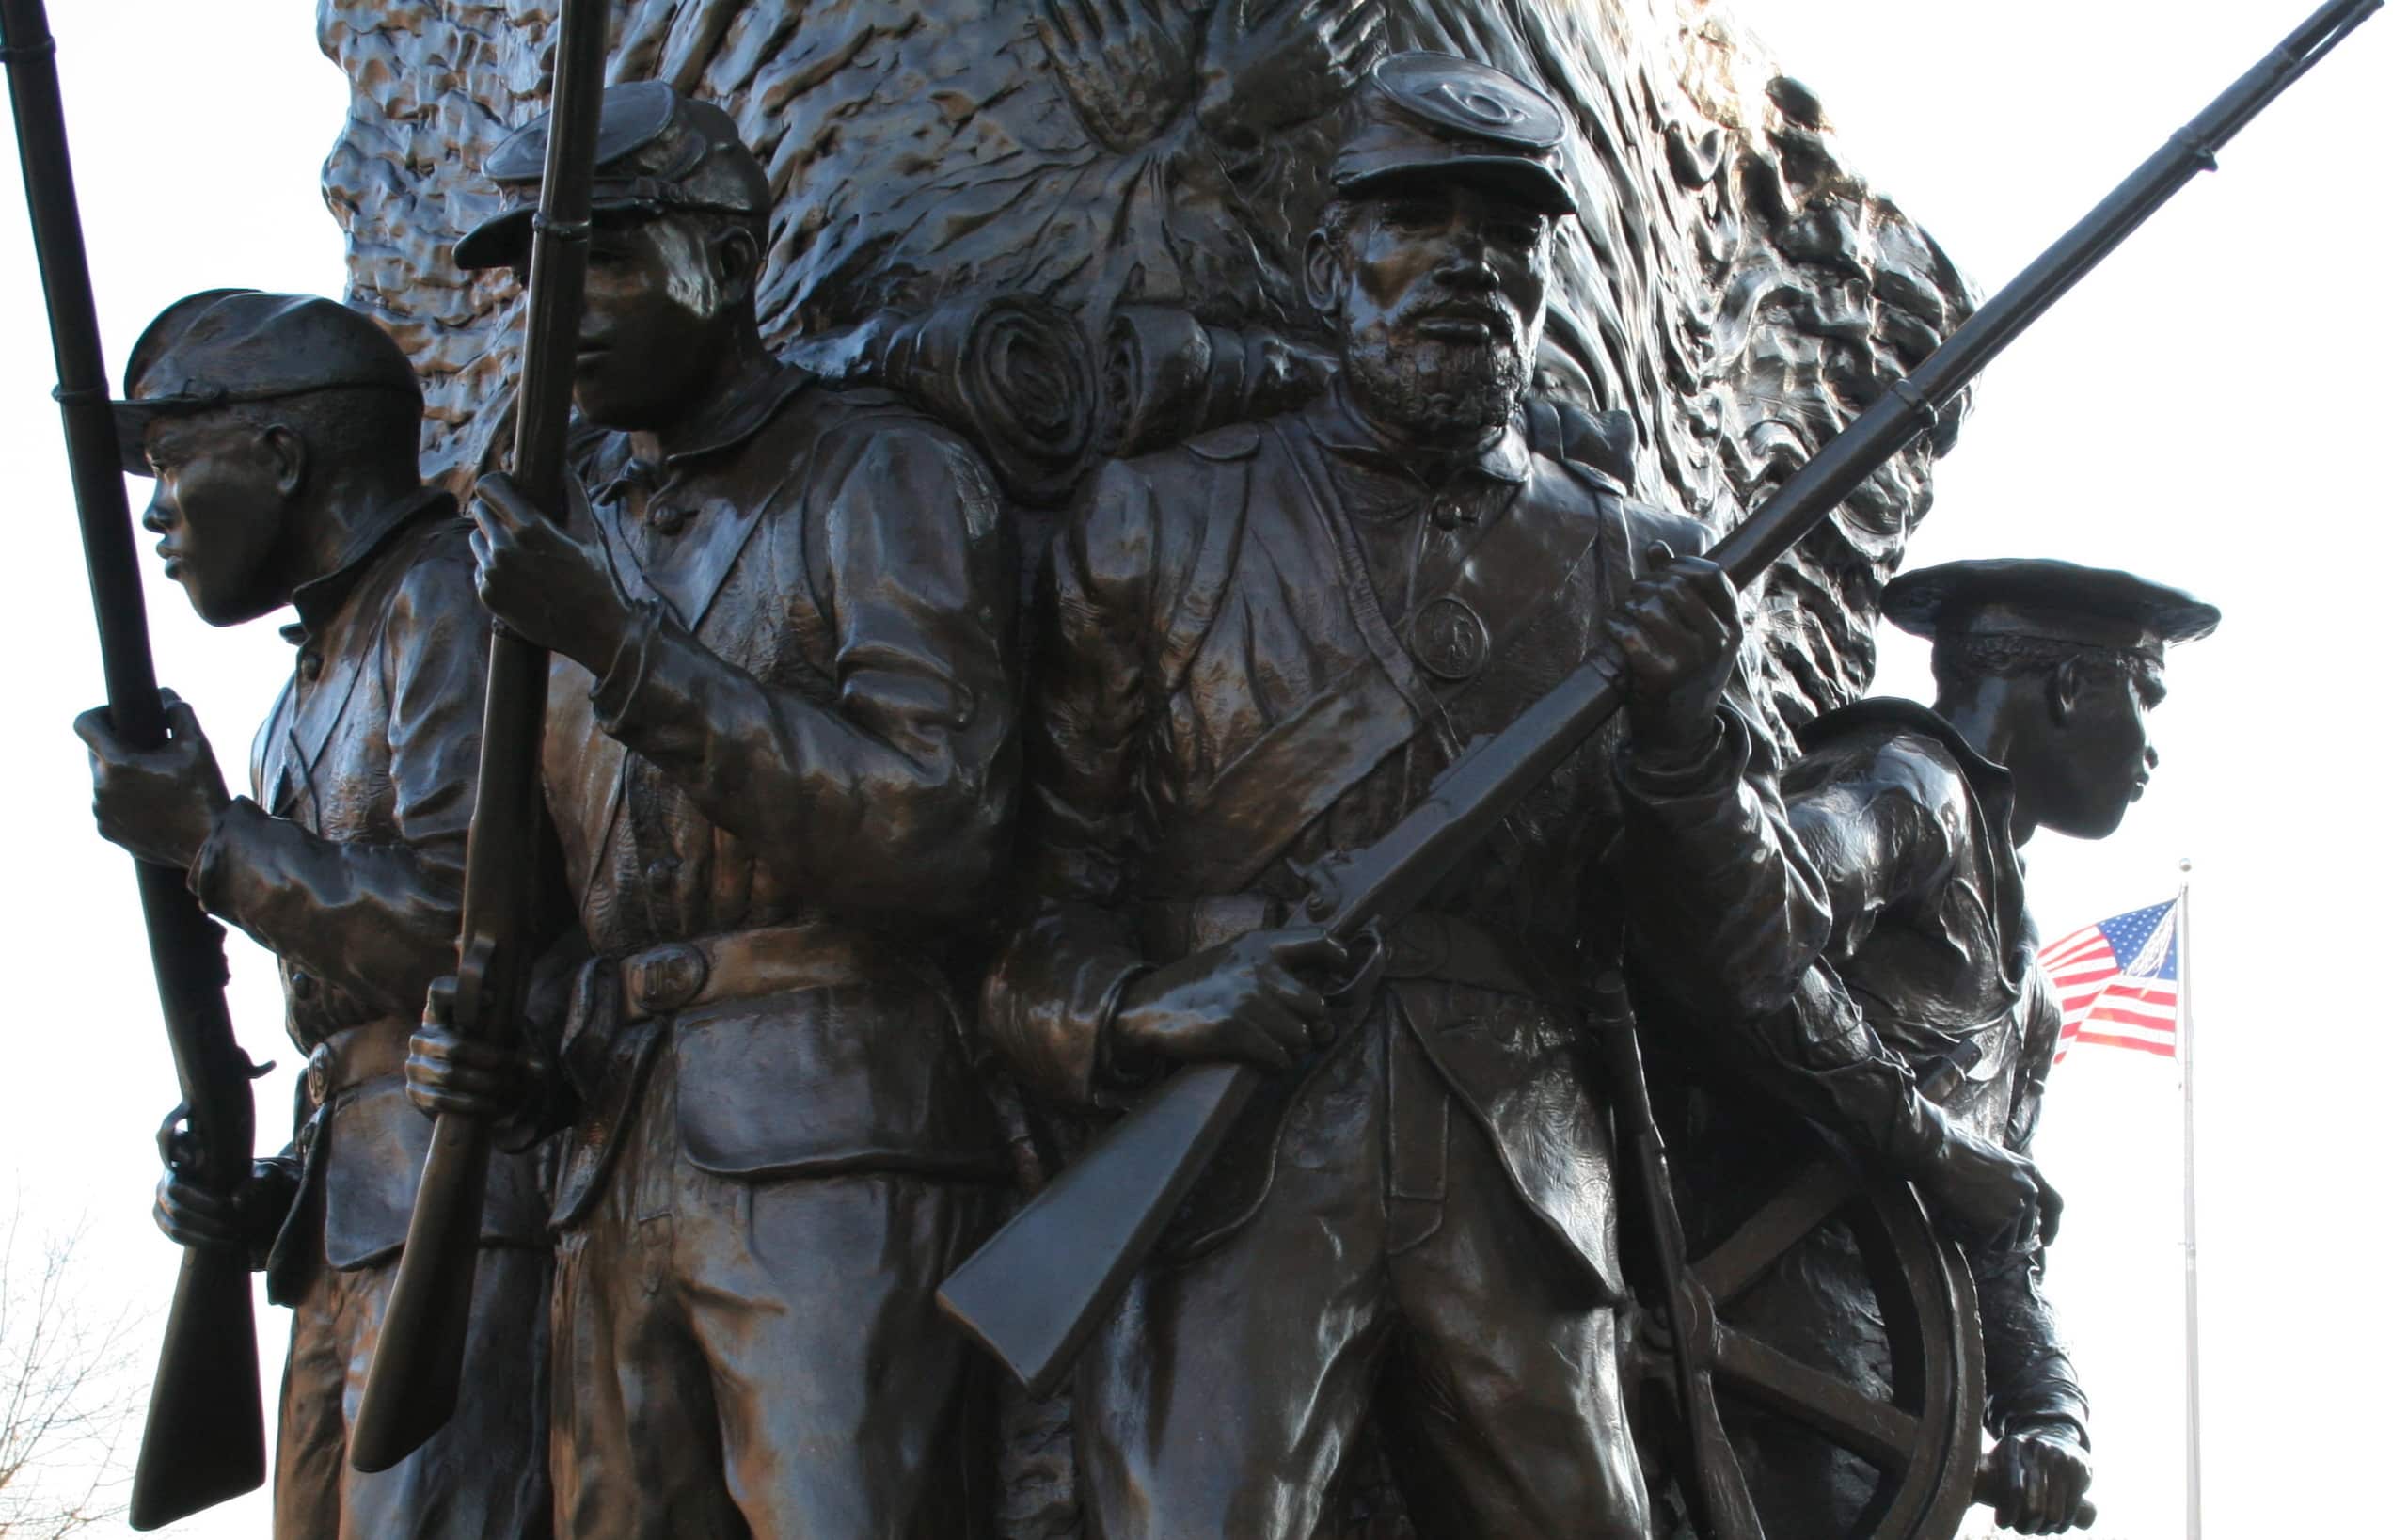 A close-up photograph of a bronze statue at the African American Civil War Memorial Museum. The veteran monument depicts four African American soldiers standing at the ready with muskets.